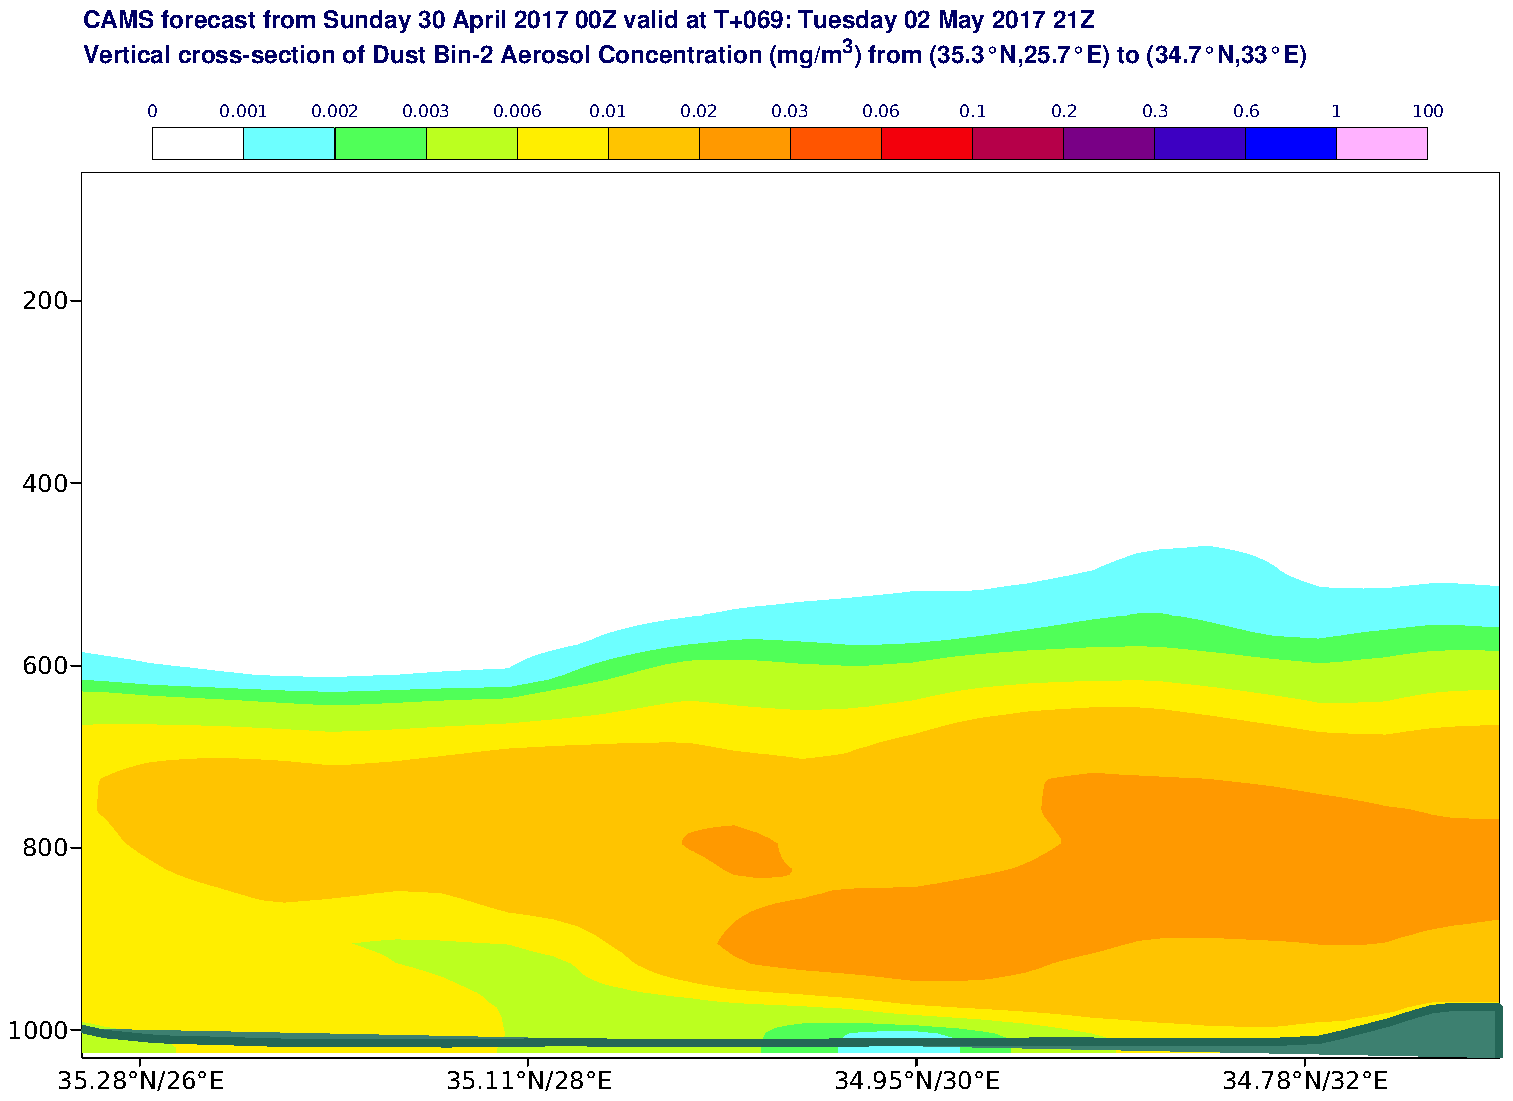 Vertical cross-section of Dust Bin-2 Aerosol Concentration (mg/m3) valid at T69 - 2017-05-02 21:00